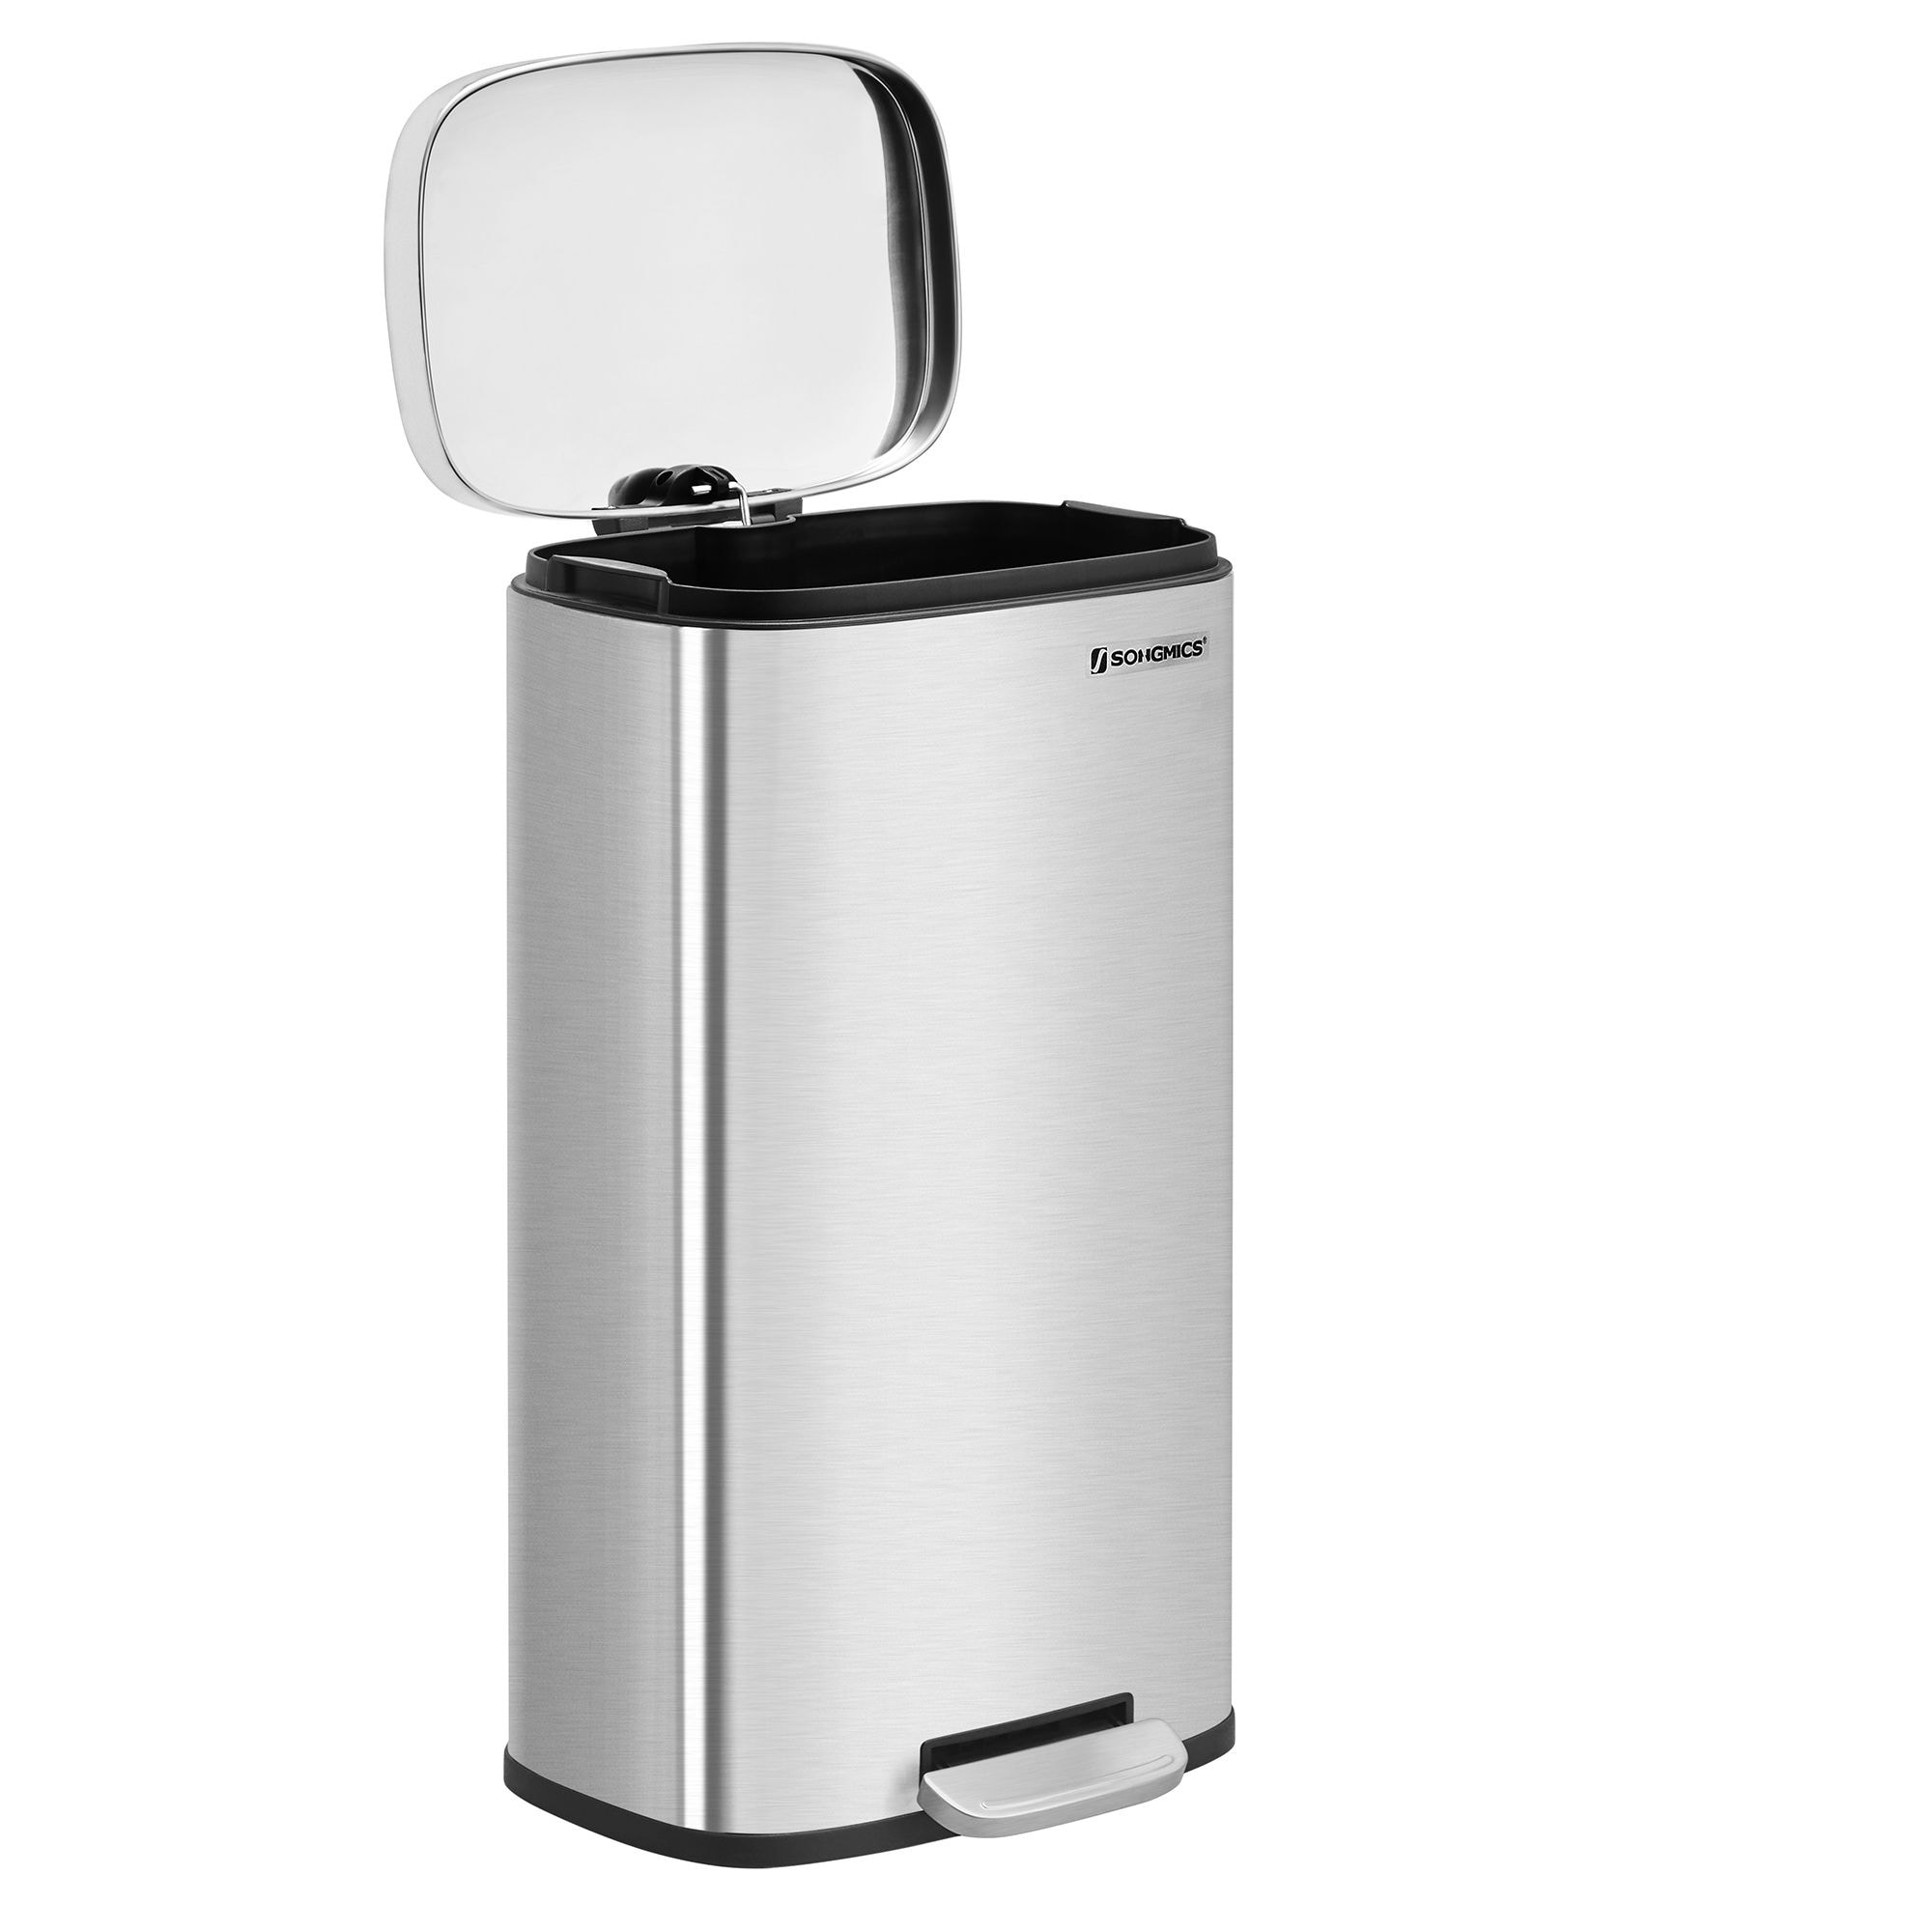 https://ak1.ostkcdn.com/images/products/is/images/direct/a878b159bd11b314fc5fba81325bd022bff1e778/Silver-Step-Open-Trash-Can-with-Plastic-Inner-Bucket.jpg